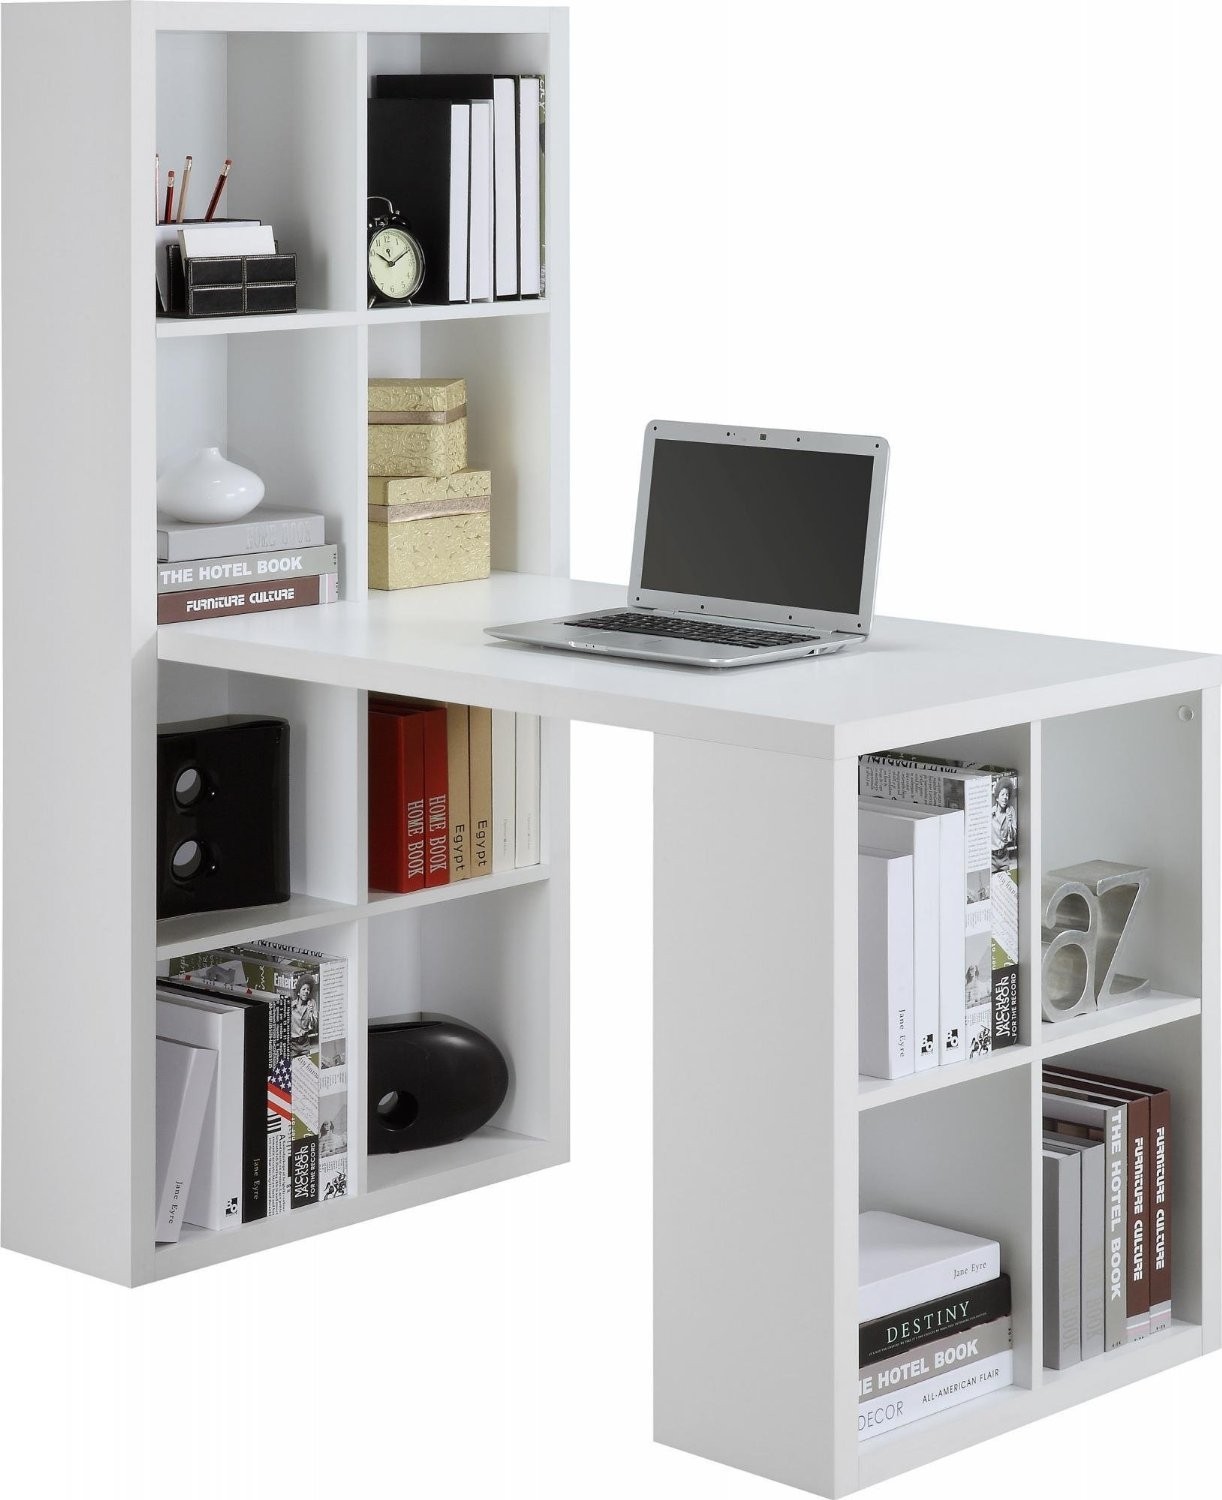 Top 30 collection of white bookcases and bookshelfs 1